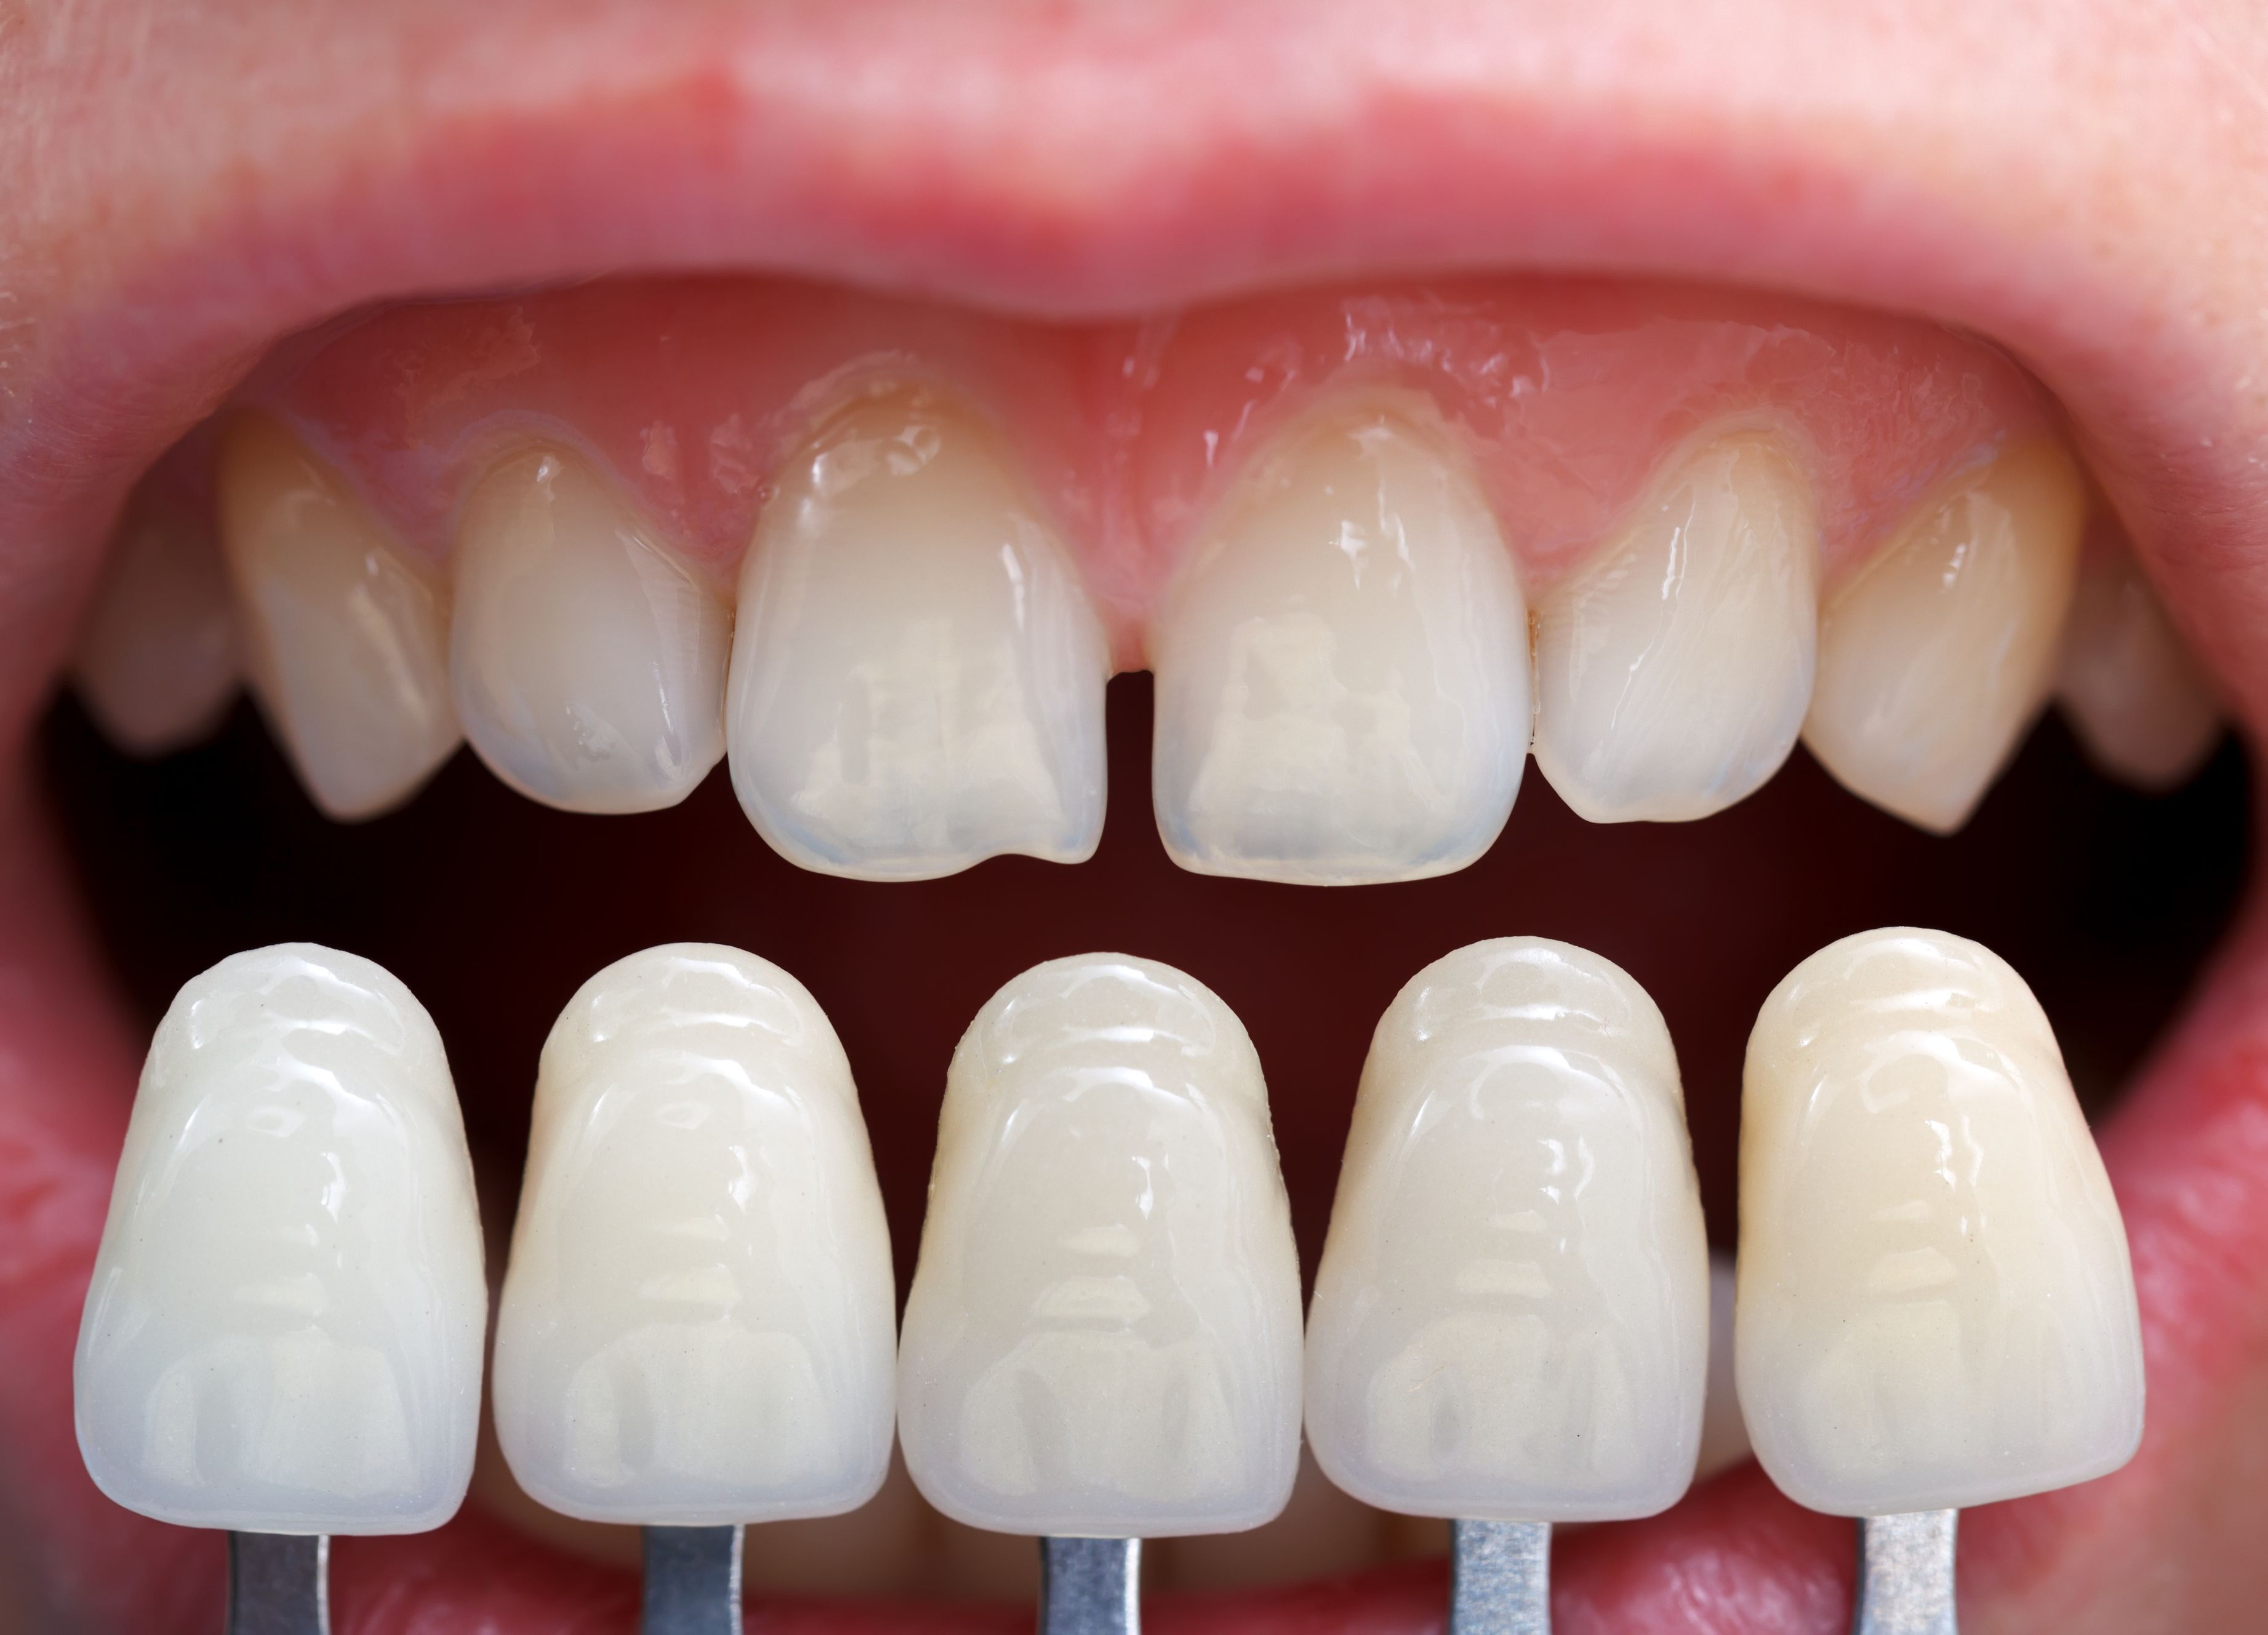 Where can I find a Cosmetic Dentist in San Mateo?